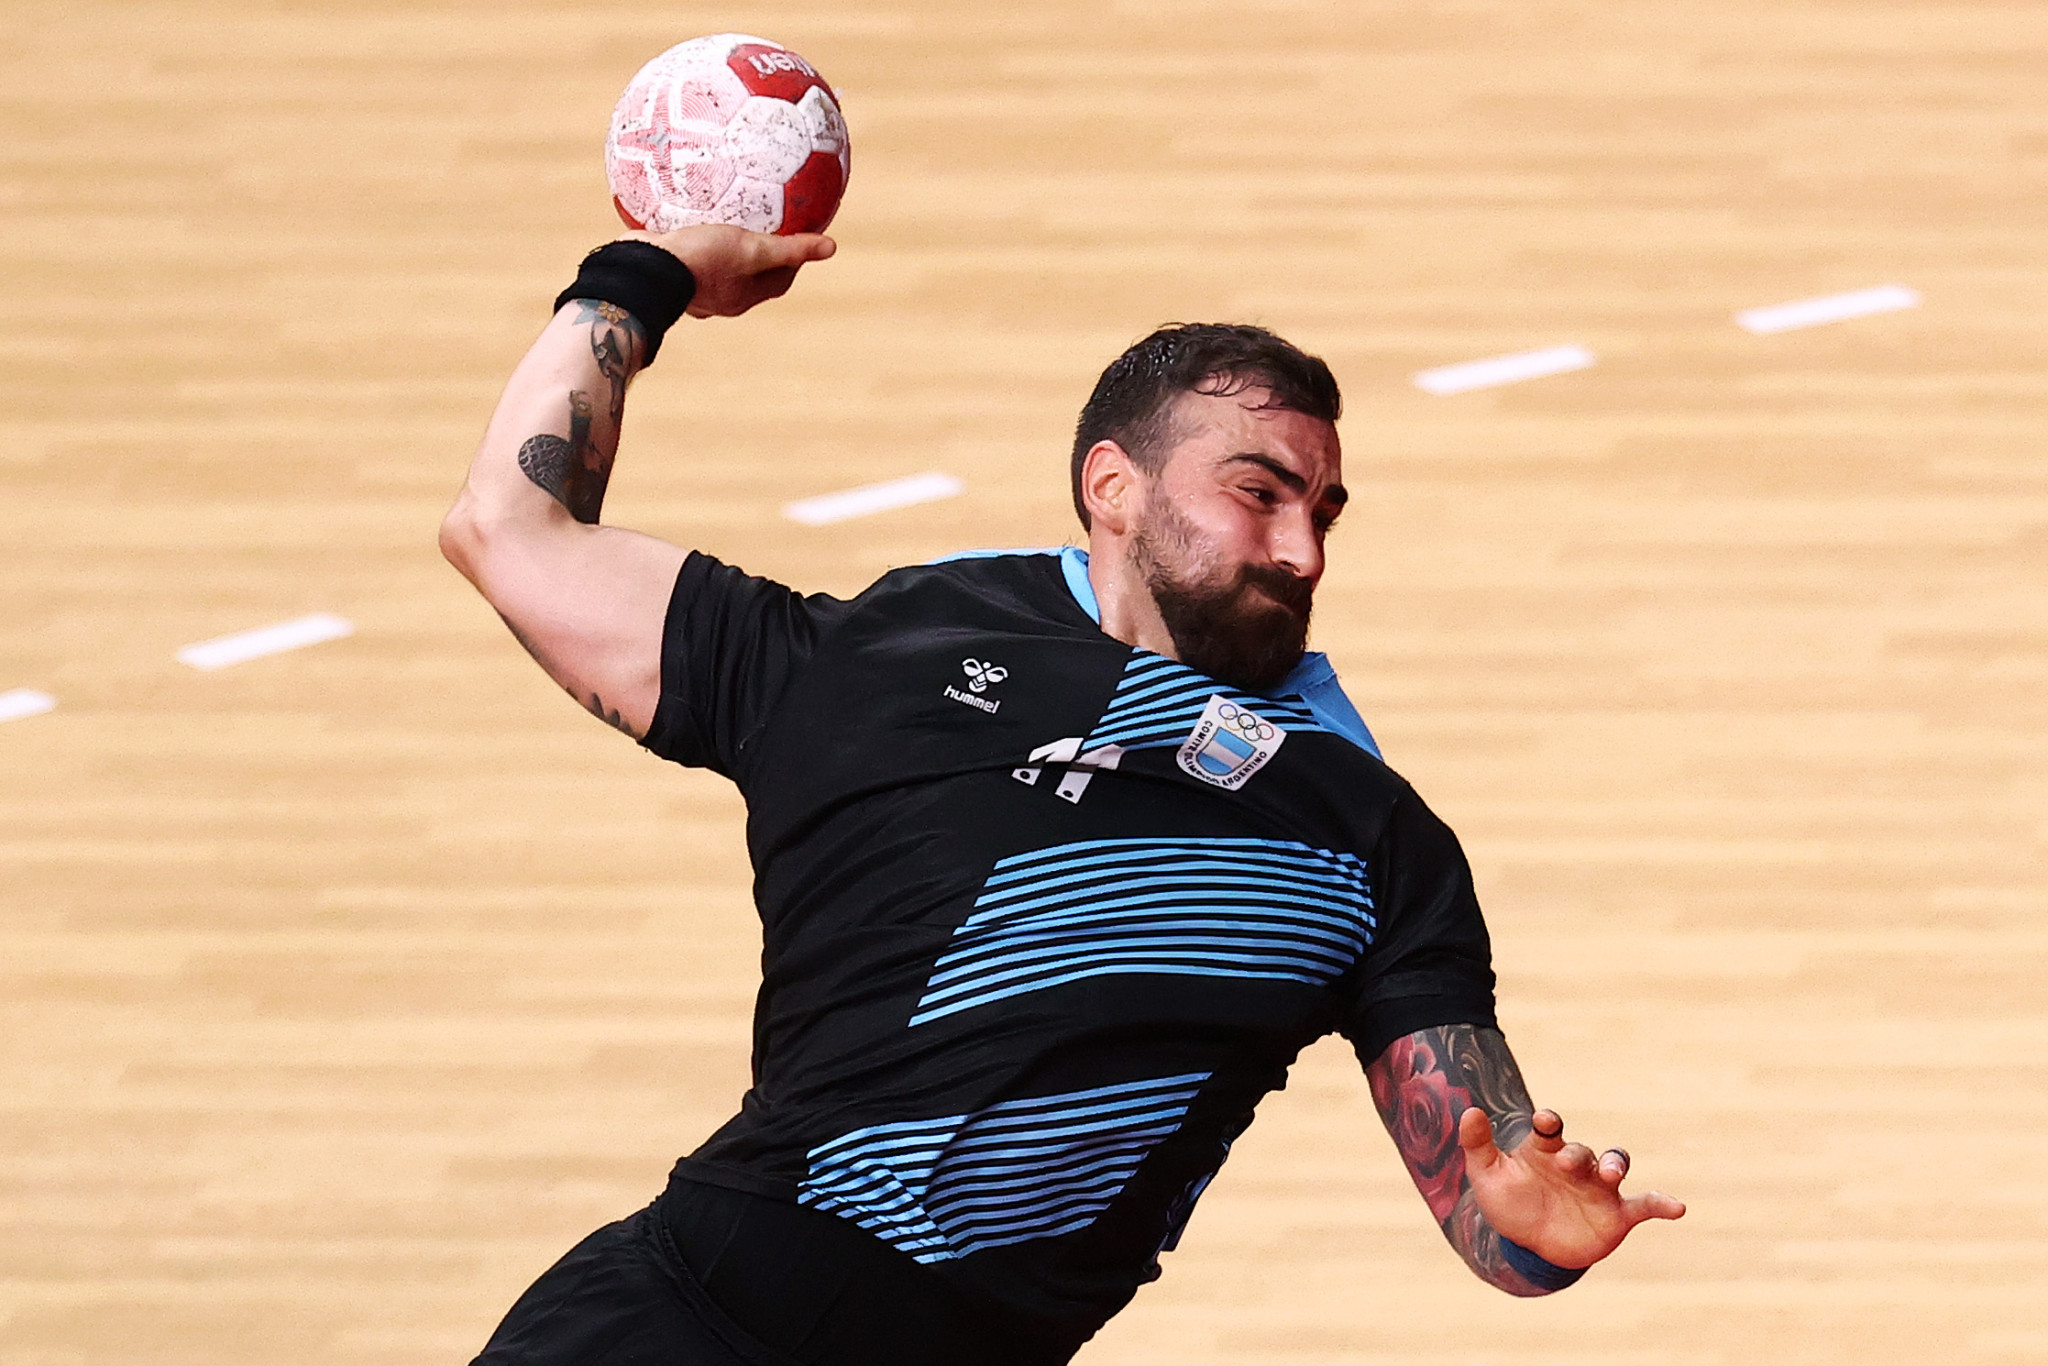 Argentina seek to defend title at South and Central American Men's Handball Championship